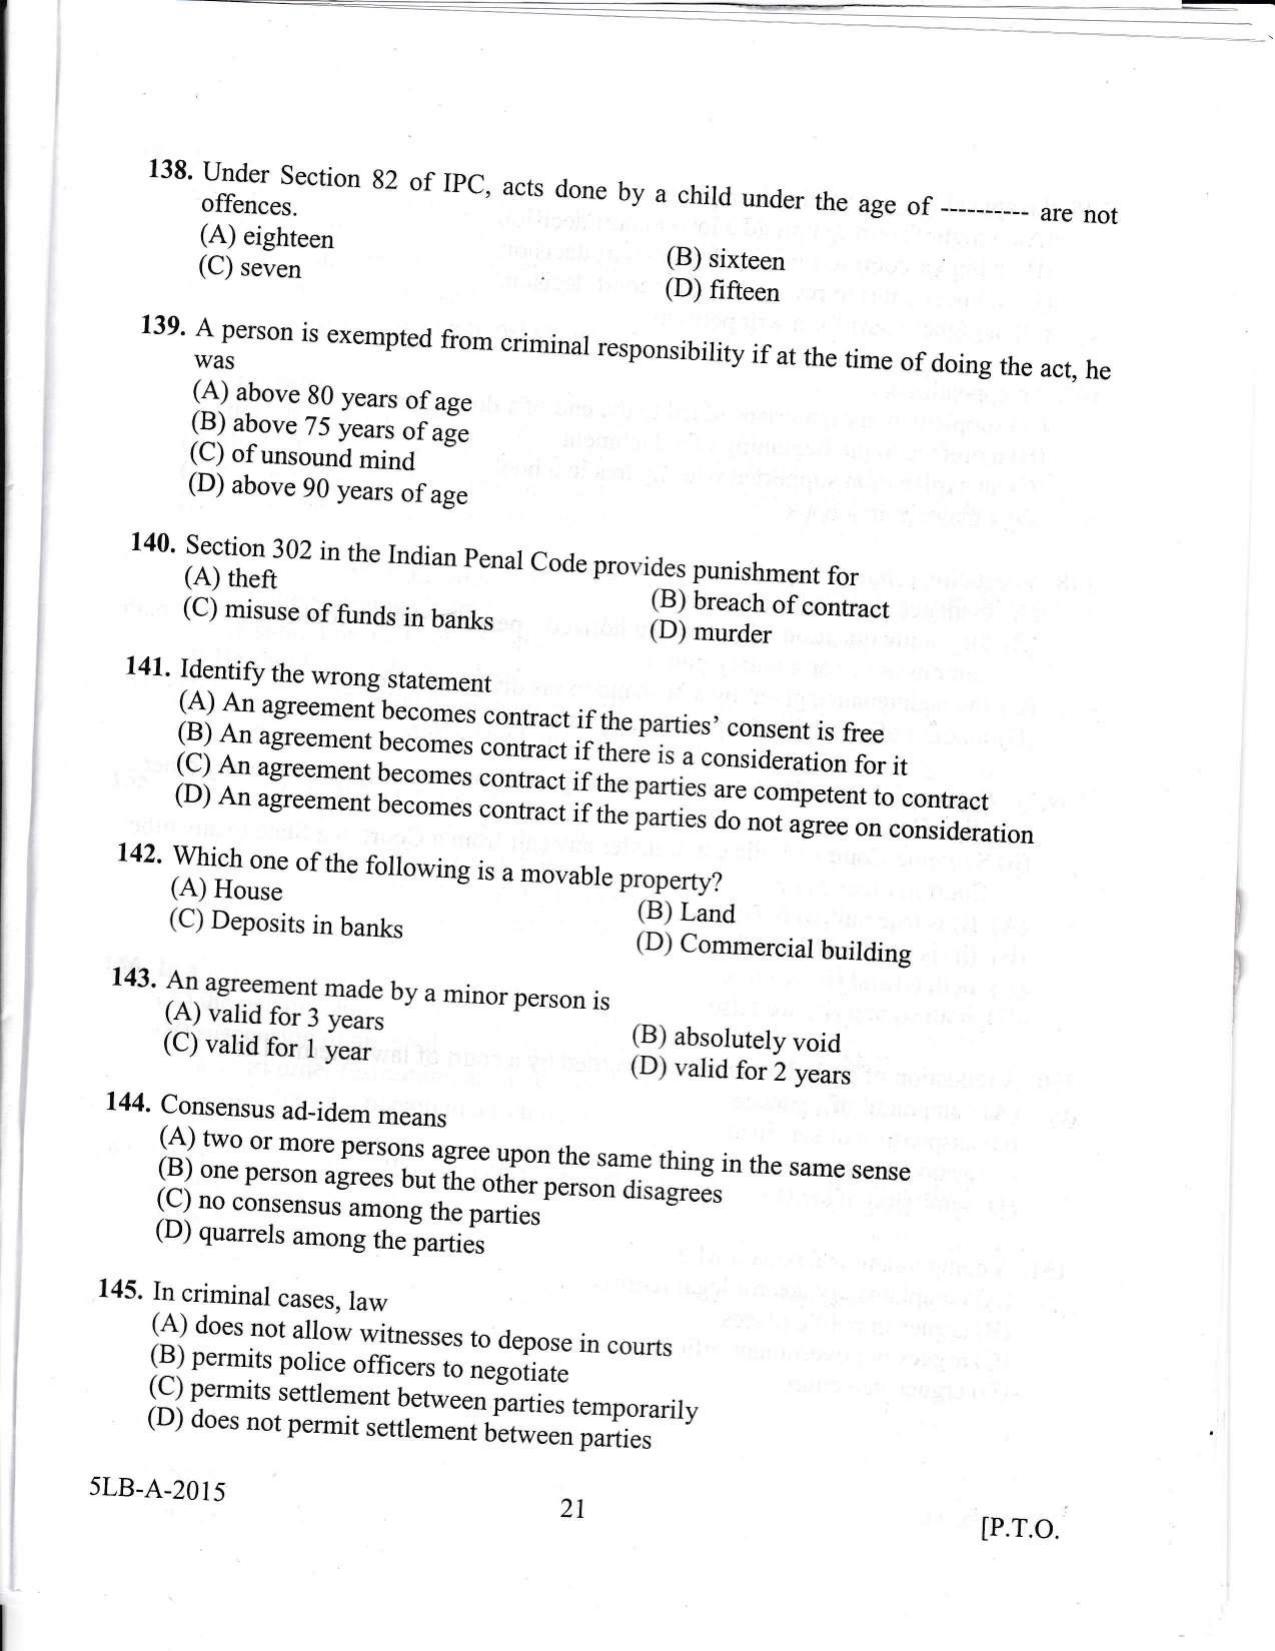 KLEE 5 Year LLB Exam 2015 Question Paper - Page 21